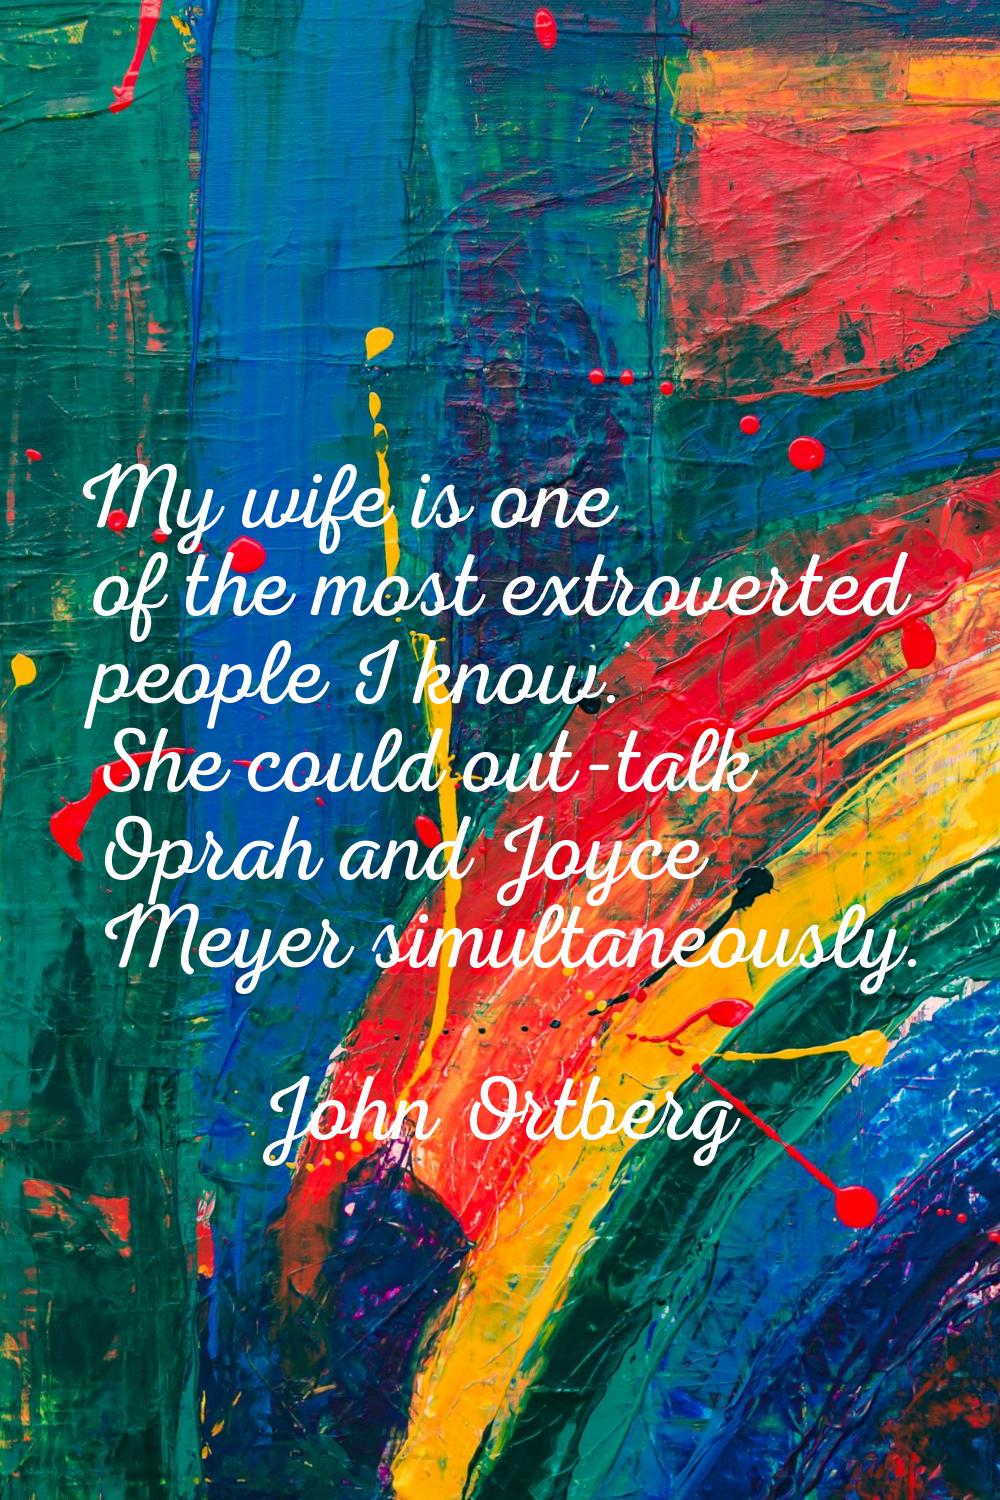 My wife is one of the most extroverted people I know. She could out-talk Oprah and Joyce Meyer simu